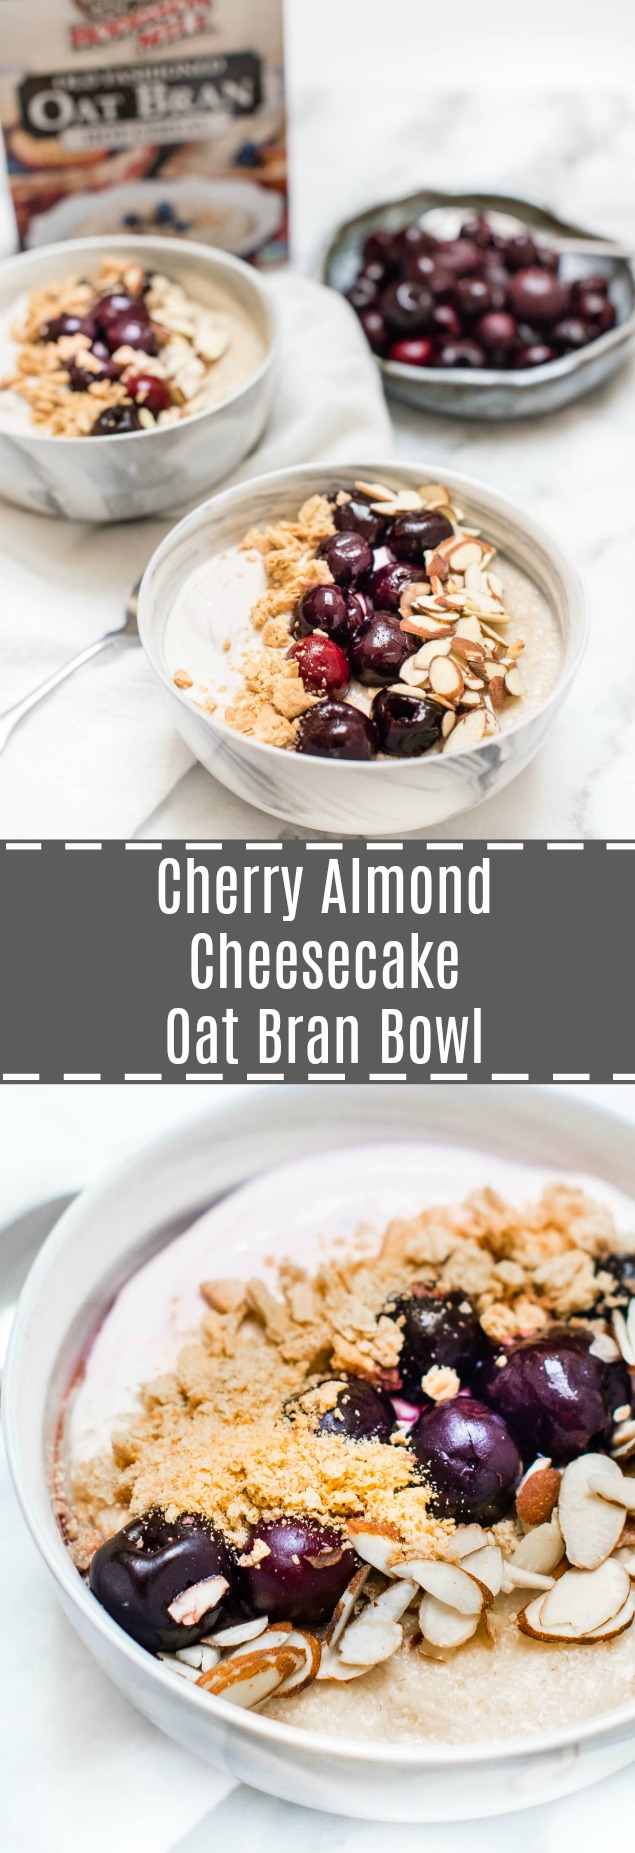 Cherry Almond Cheesecake Oat Bran Bowl is a tasty and quick fix breakfast that is high in protein and fiber, making you you feel fuller longer.